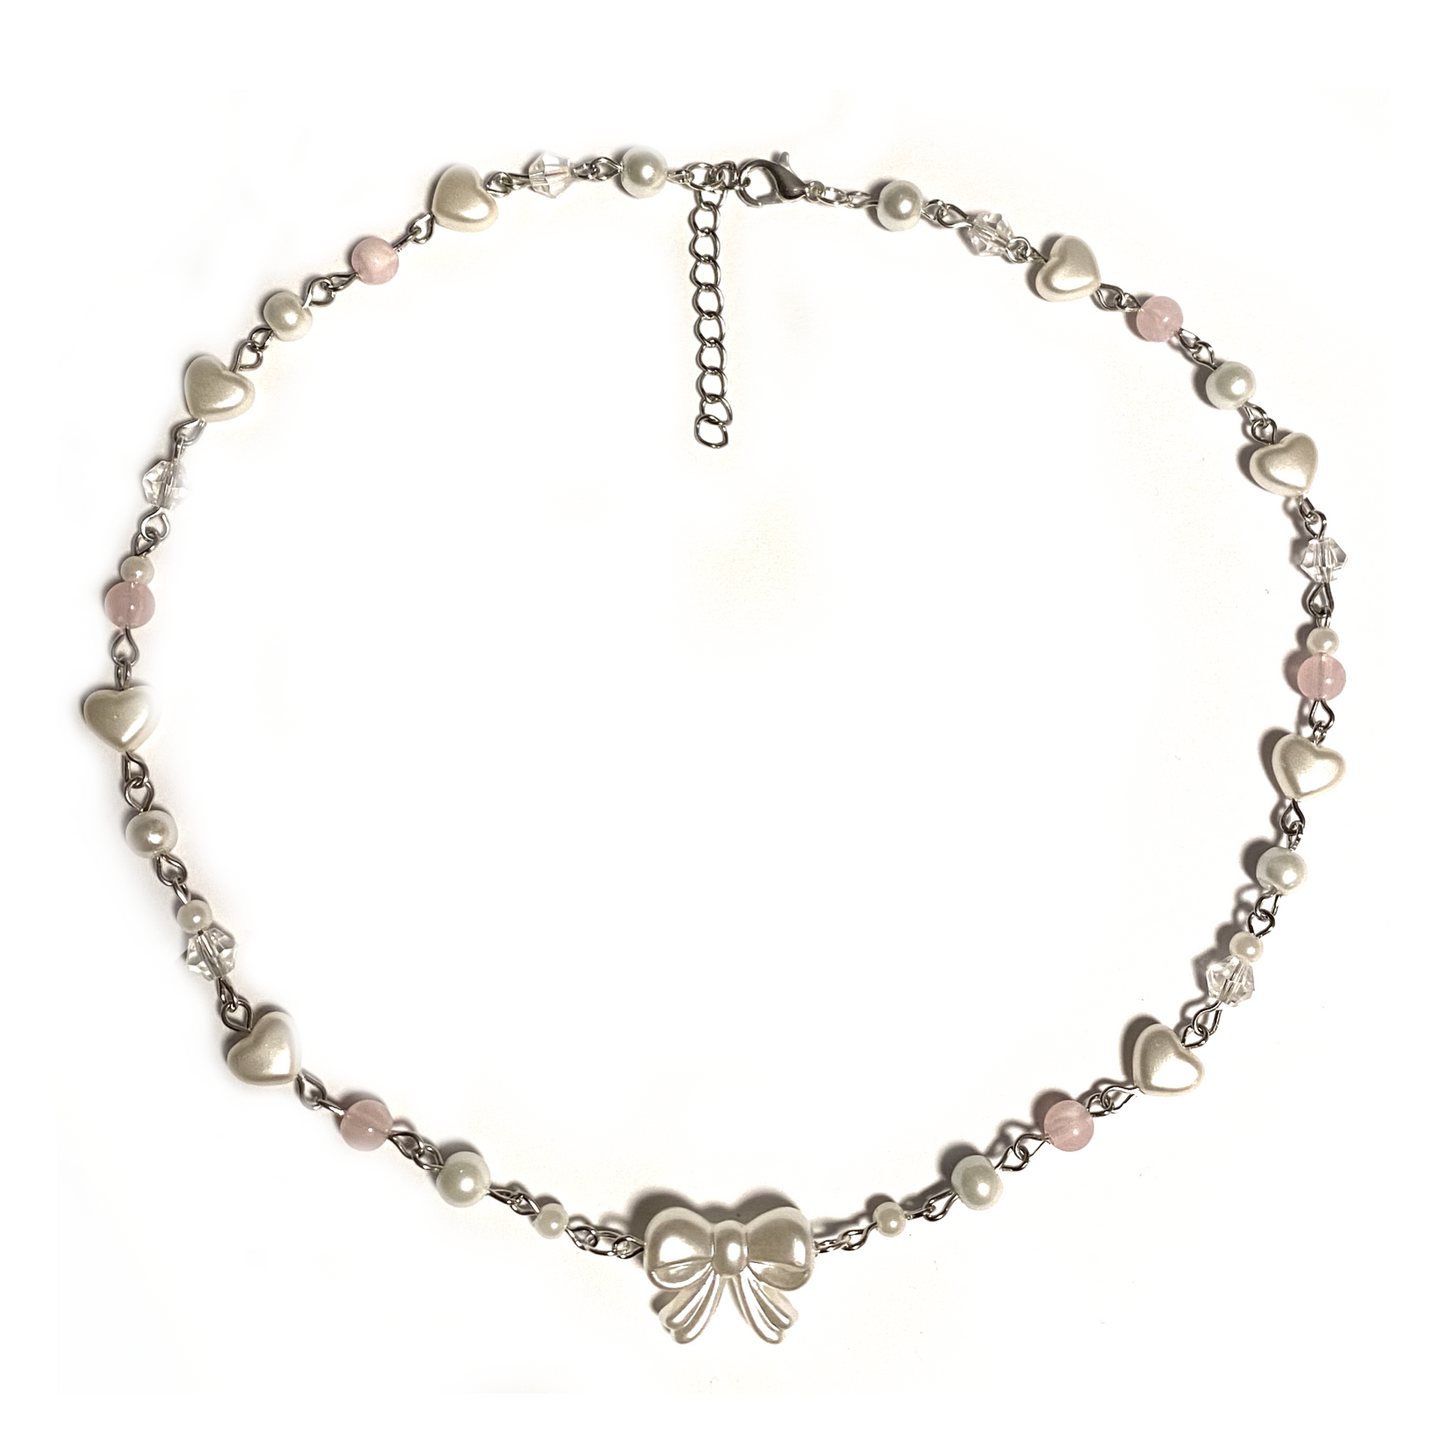 Beaded Necklace with Bow Charm